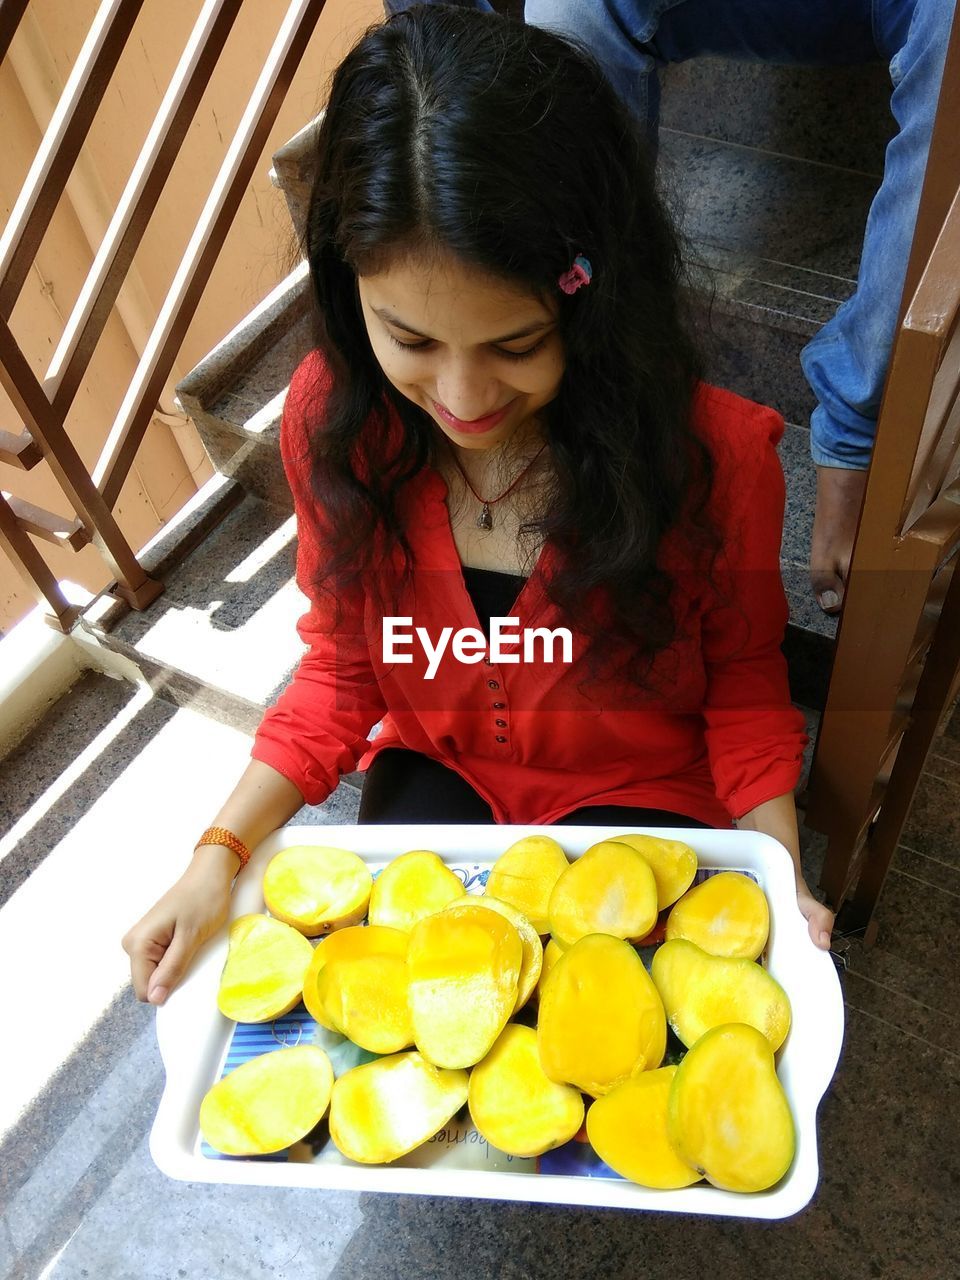 HIGH ANGLE VIEW OF YOUNG WOMAN HOLDING FOOD ON TABLE